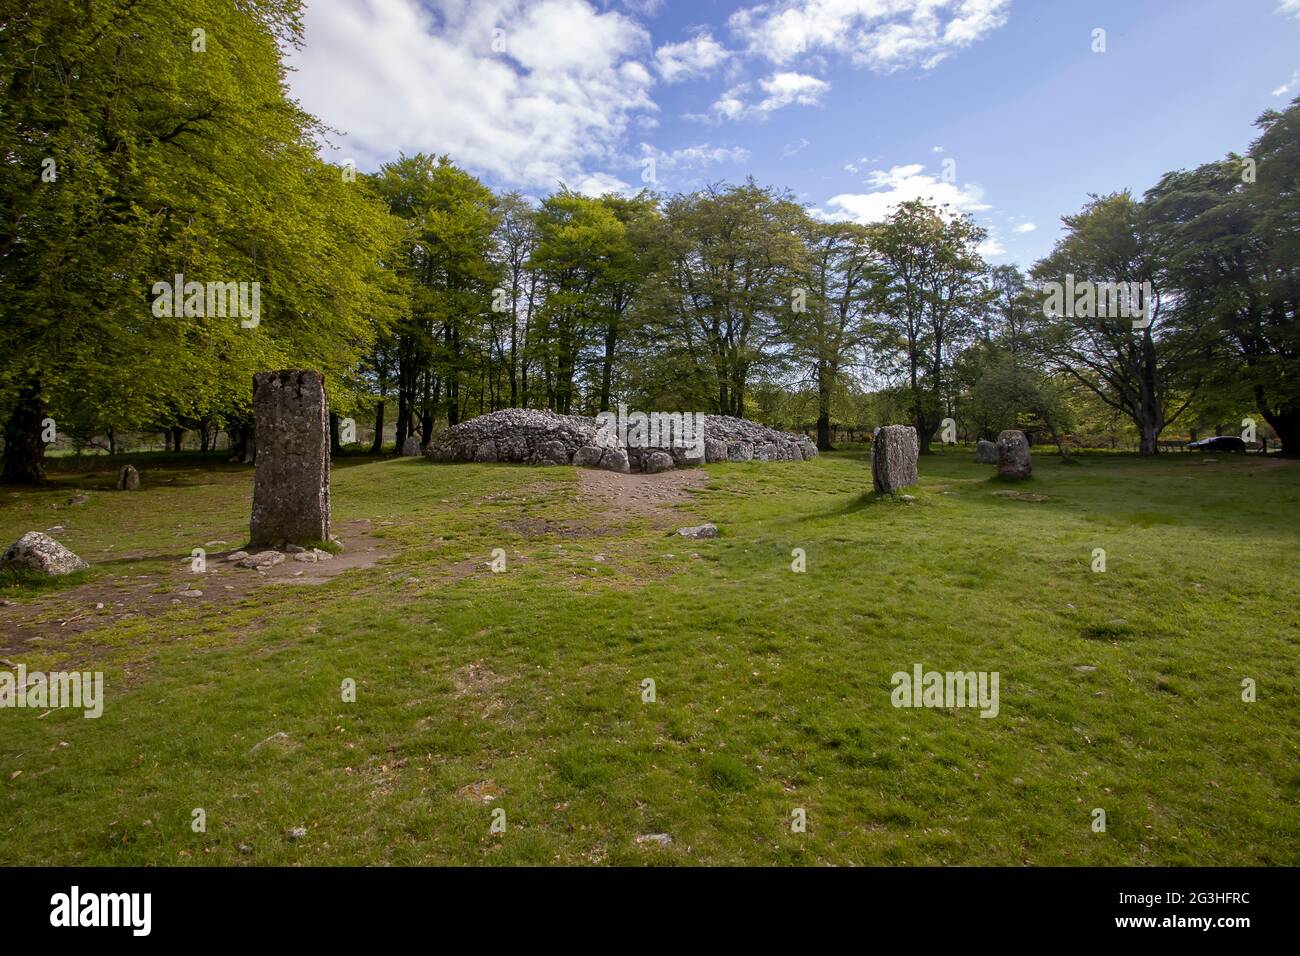 The Bronze Age burial site of Clava Cairns in the Scottish Highlands, UK Stock Photo